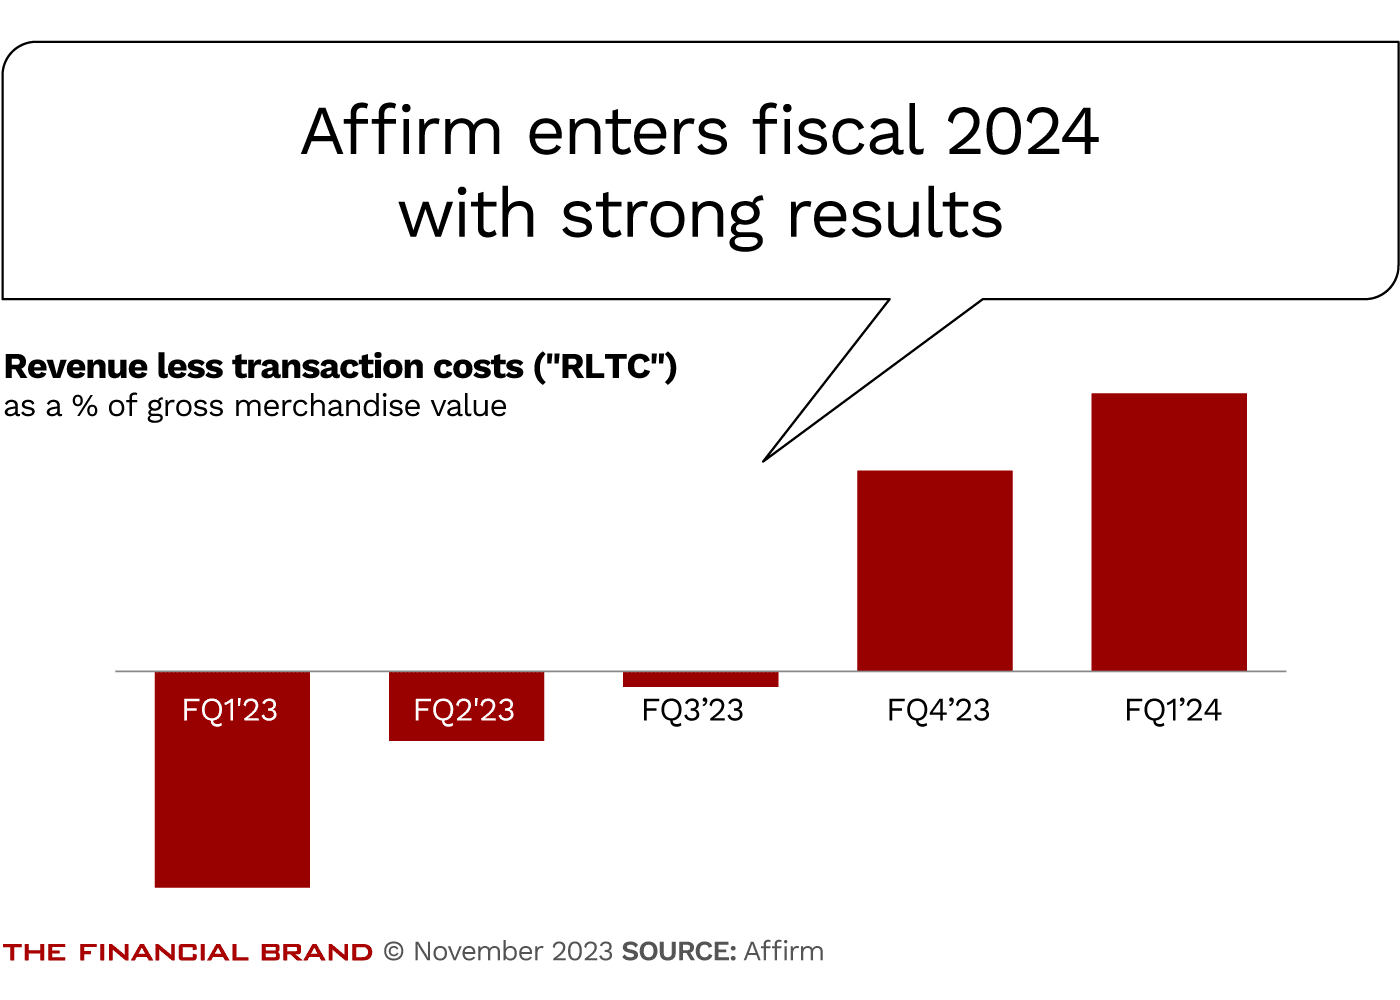 Affirm enters fiscal 2024 with strong results